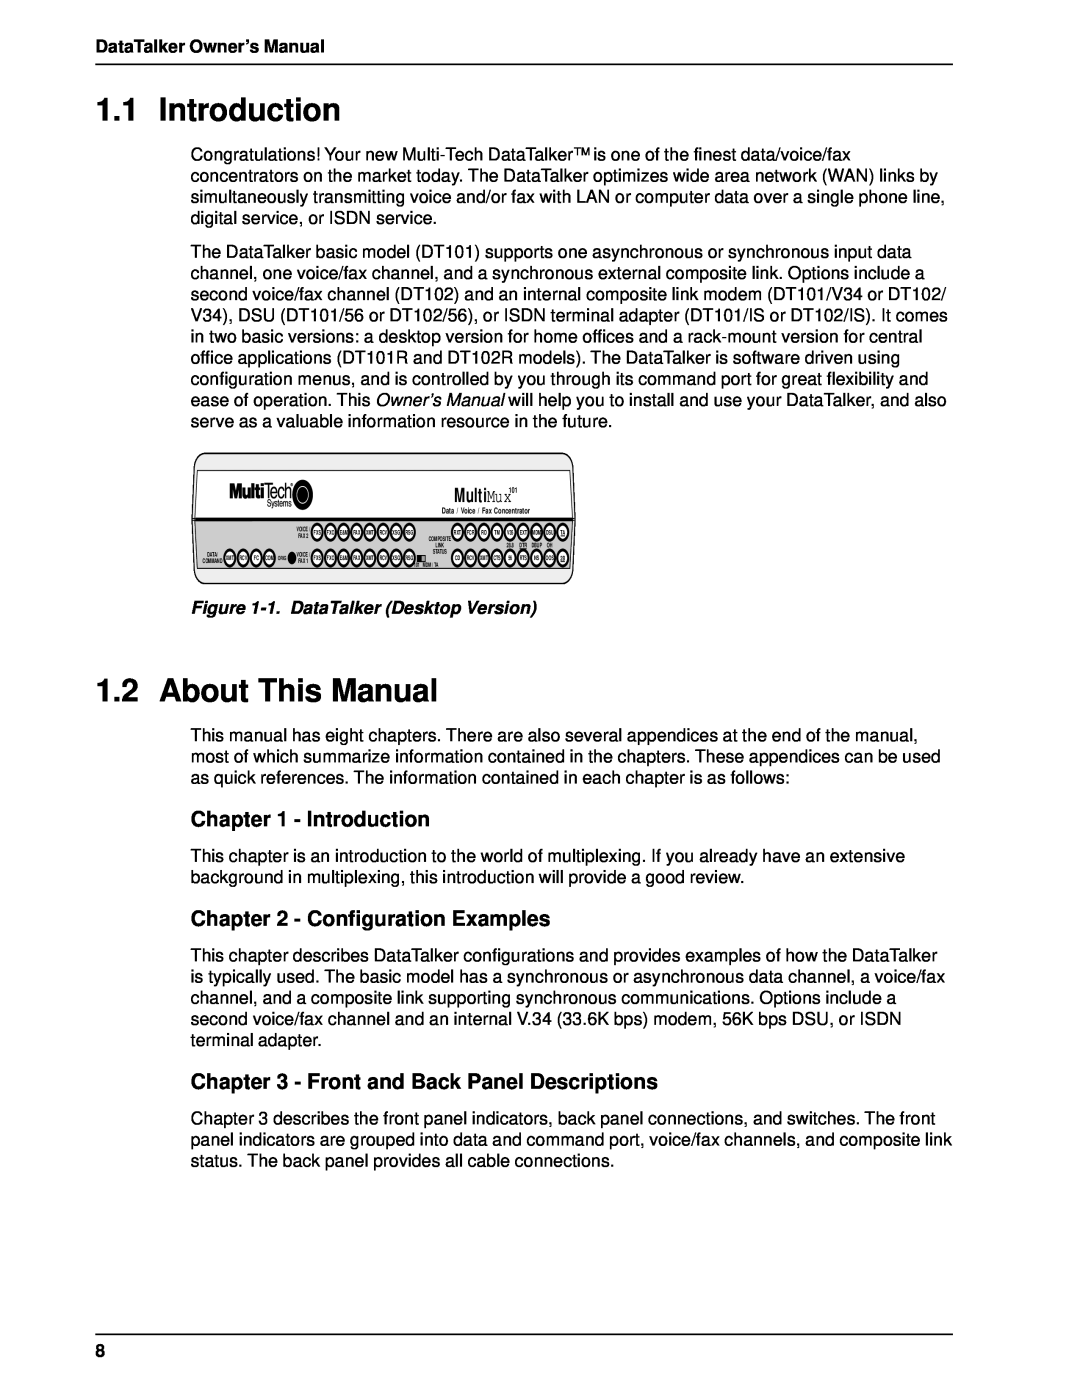 Multi-Tech Systems DT101, DT102 Introduction, About This Manual, Configuration Examples, Front and Back Panel Descriptions 